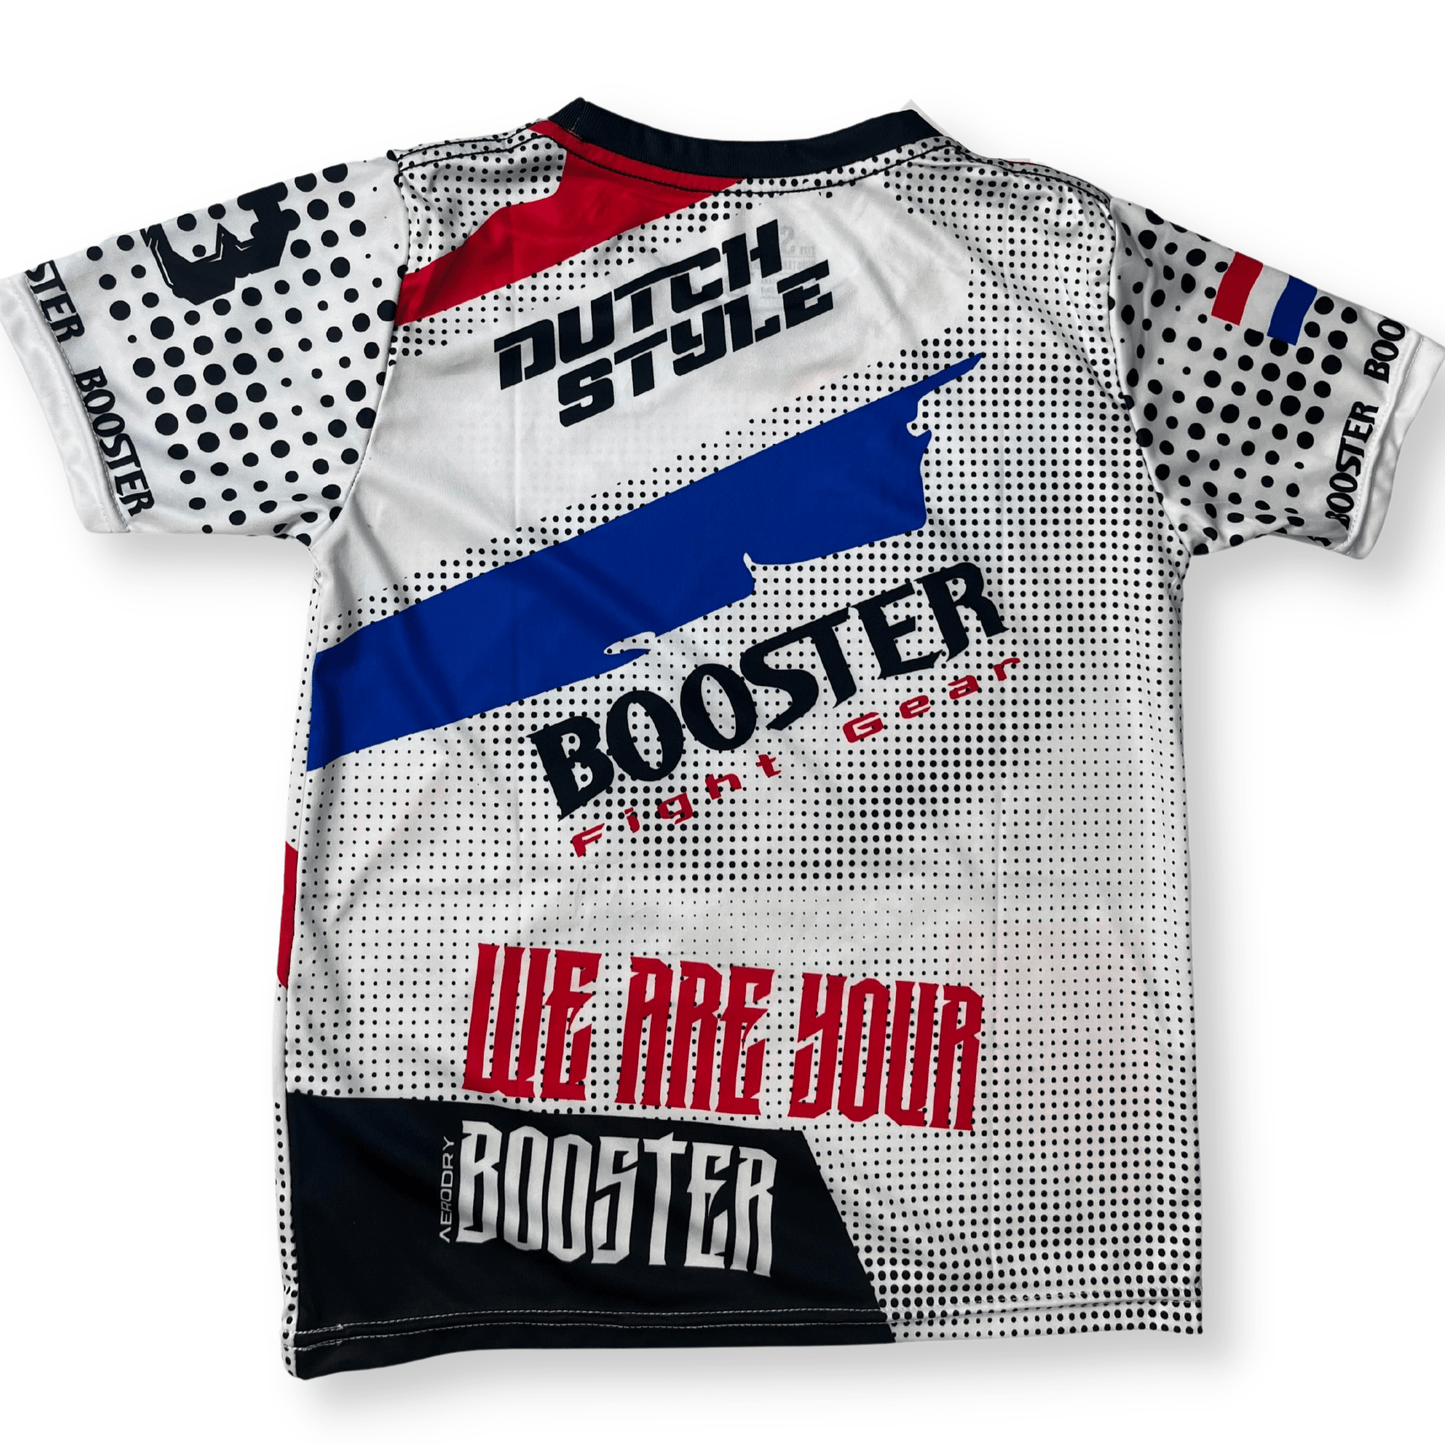 Dutch Booster Fight T-Shirt - Booster Fight Store